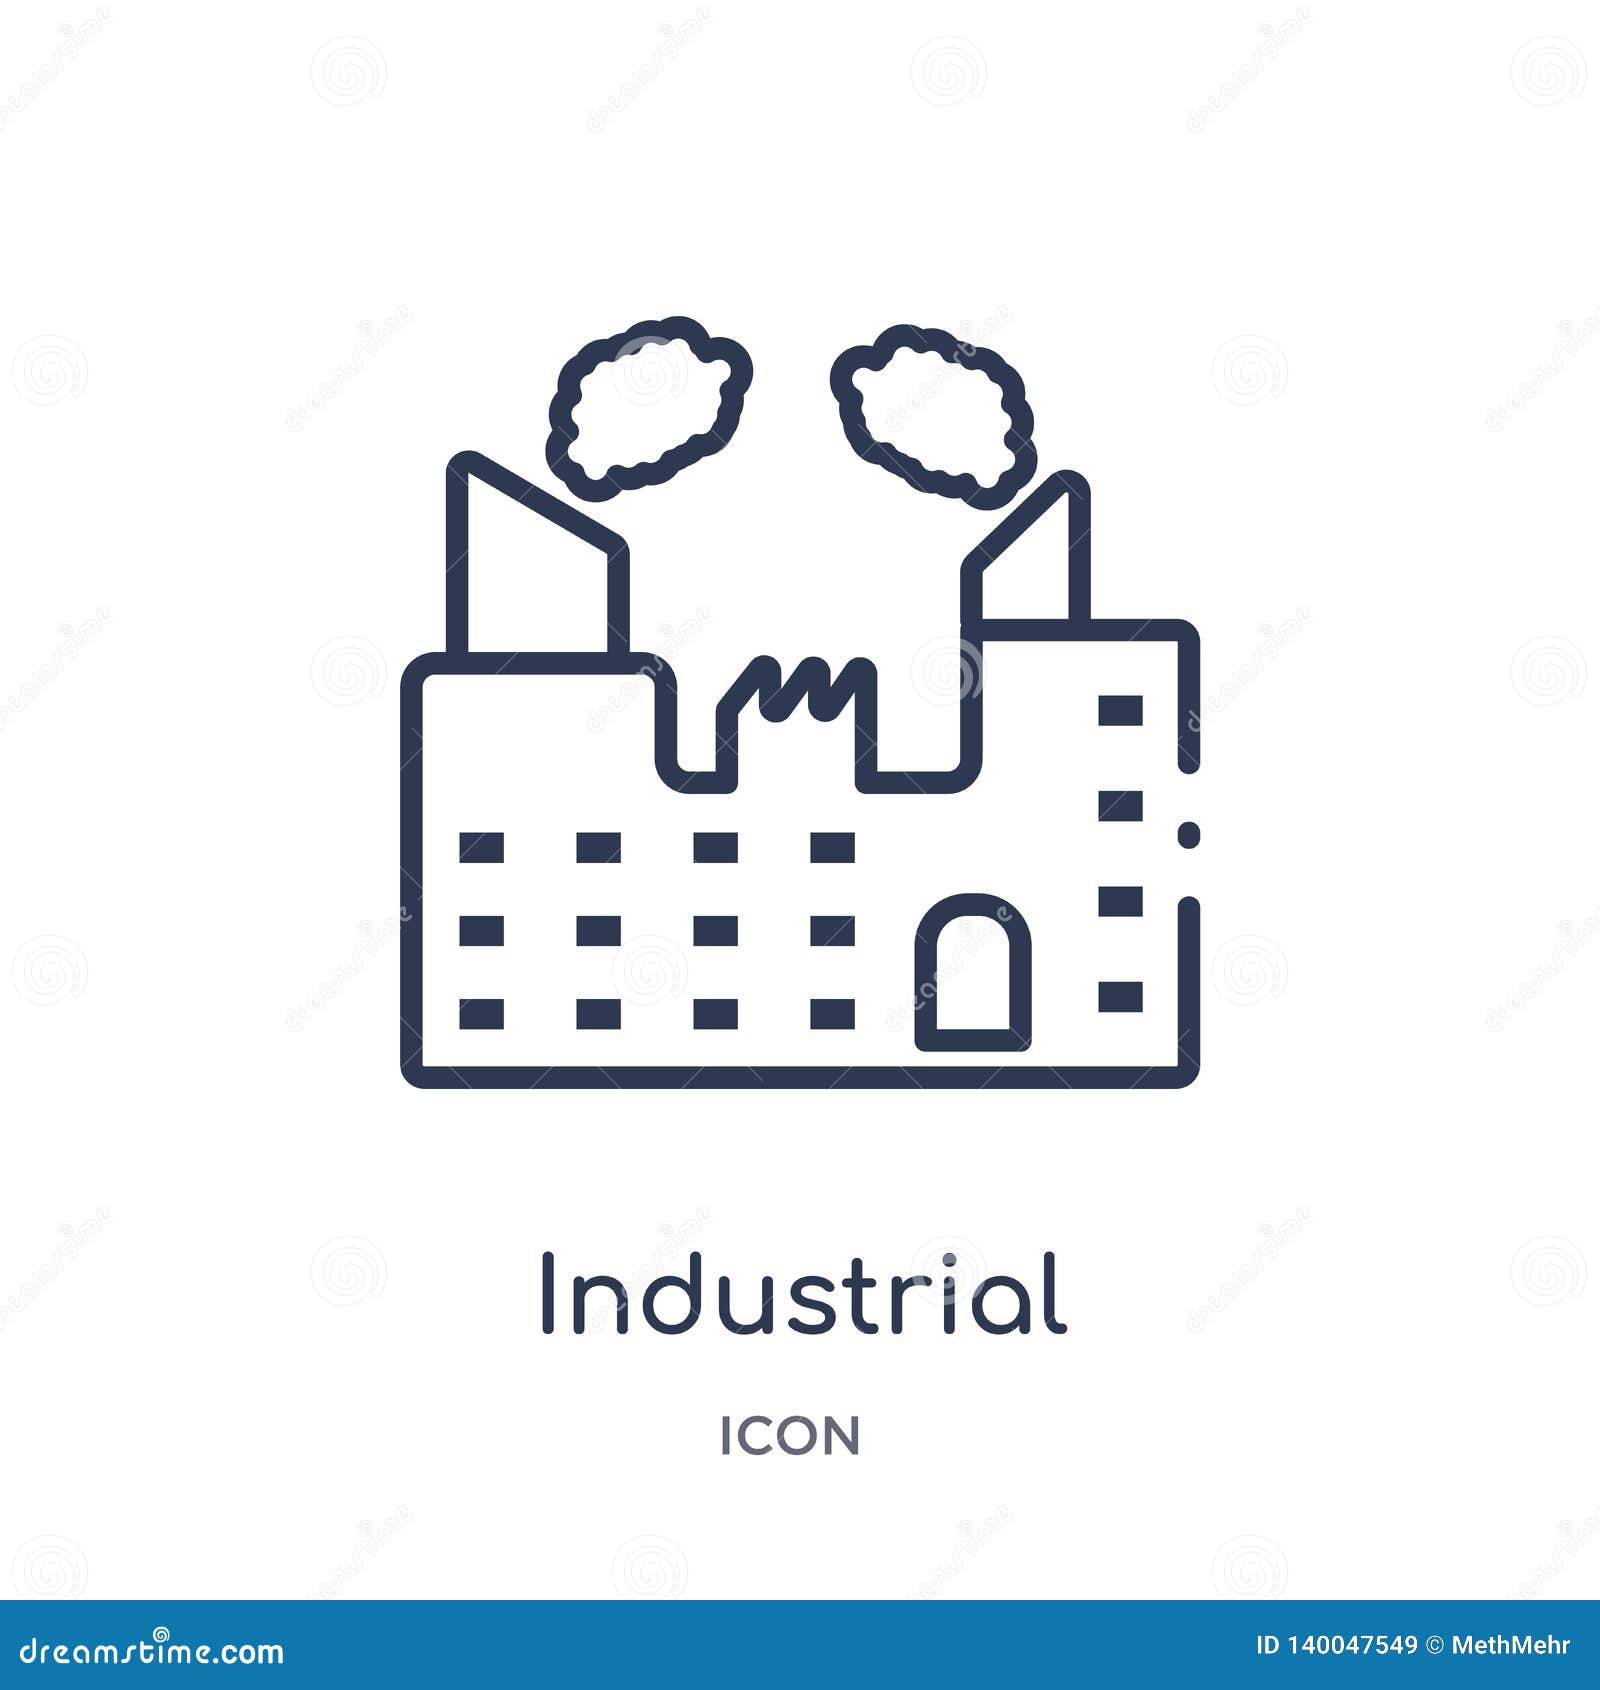 linear industrial building with contaminants icon from army outline collection. thin line industrial building with contaminants